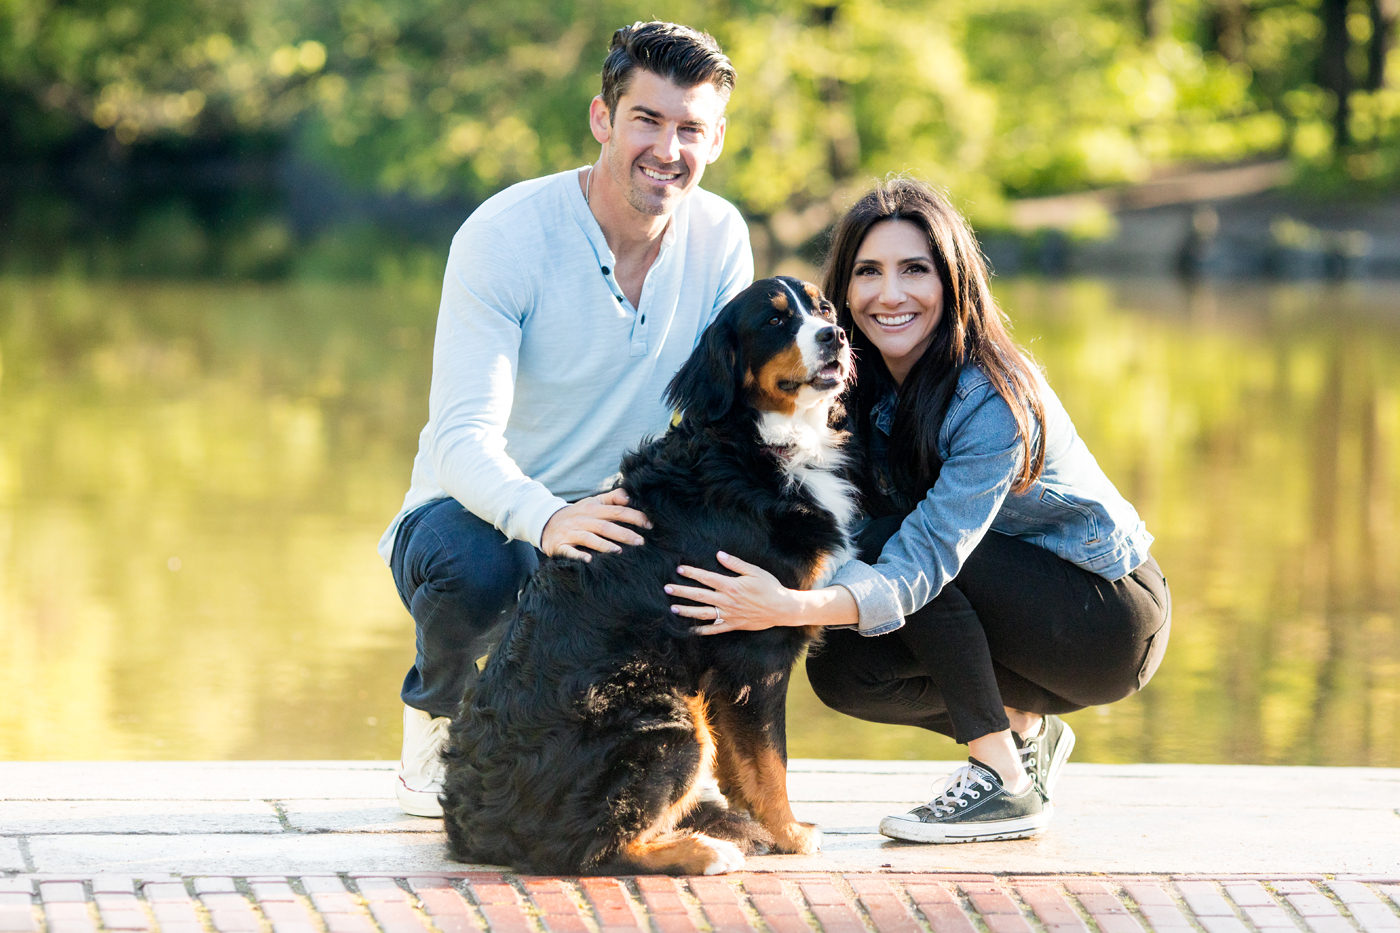 Central Park Engagement | NYC Engagement with Dogs by Sara Kauss Photography